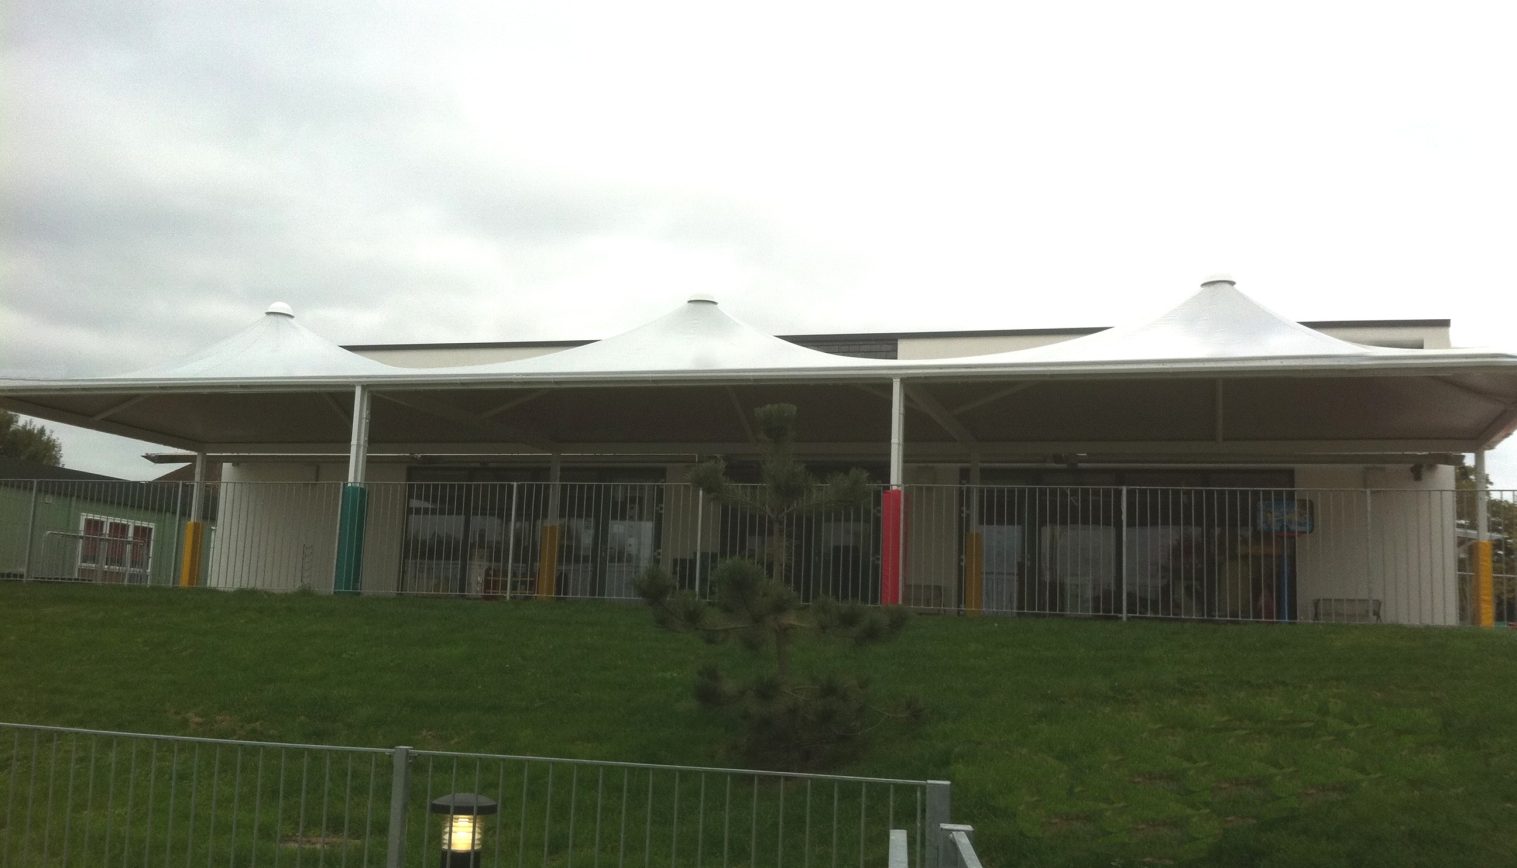 Underhill Infant School – Free Standing Tensile Fabric Canopy